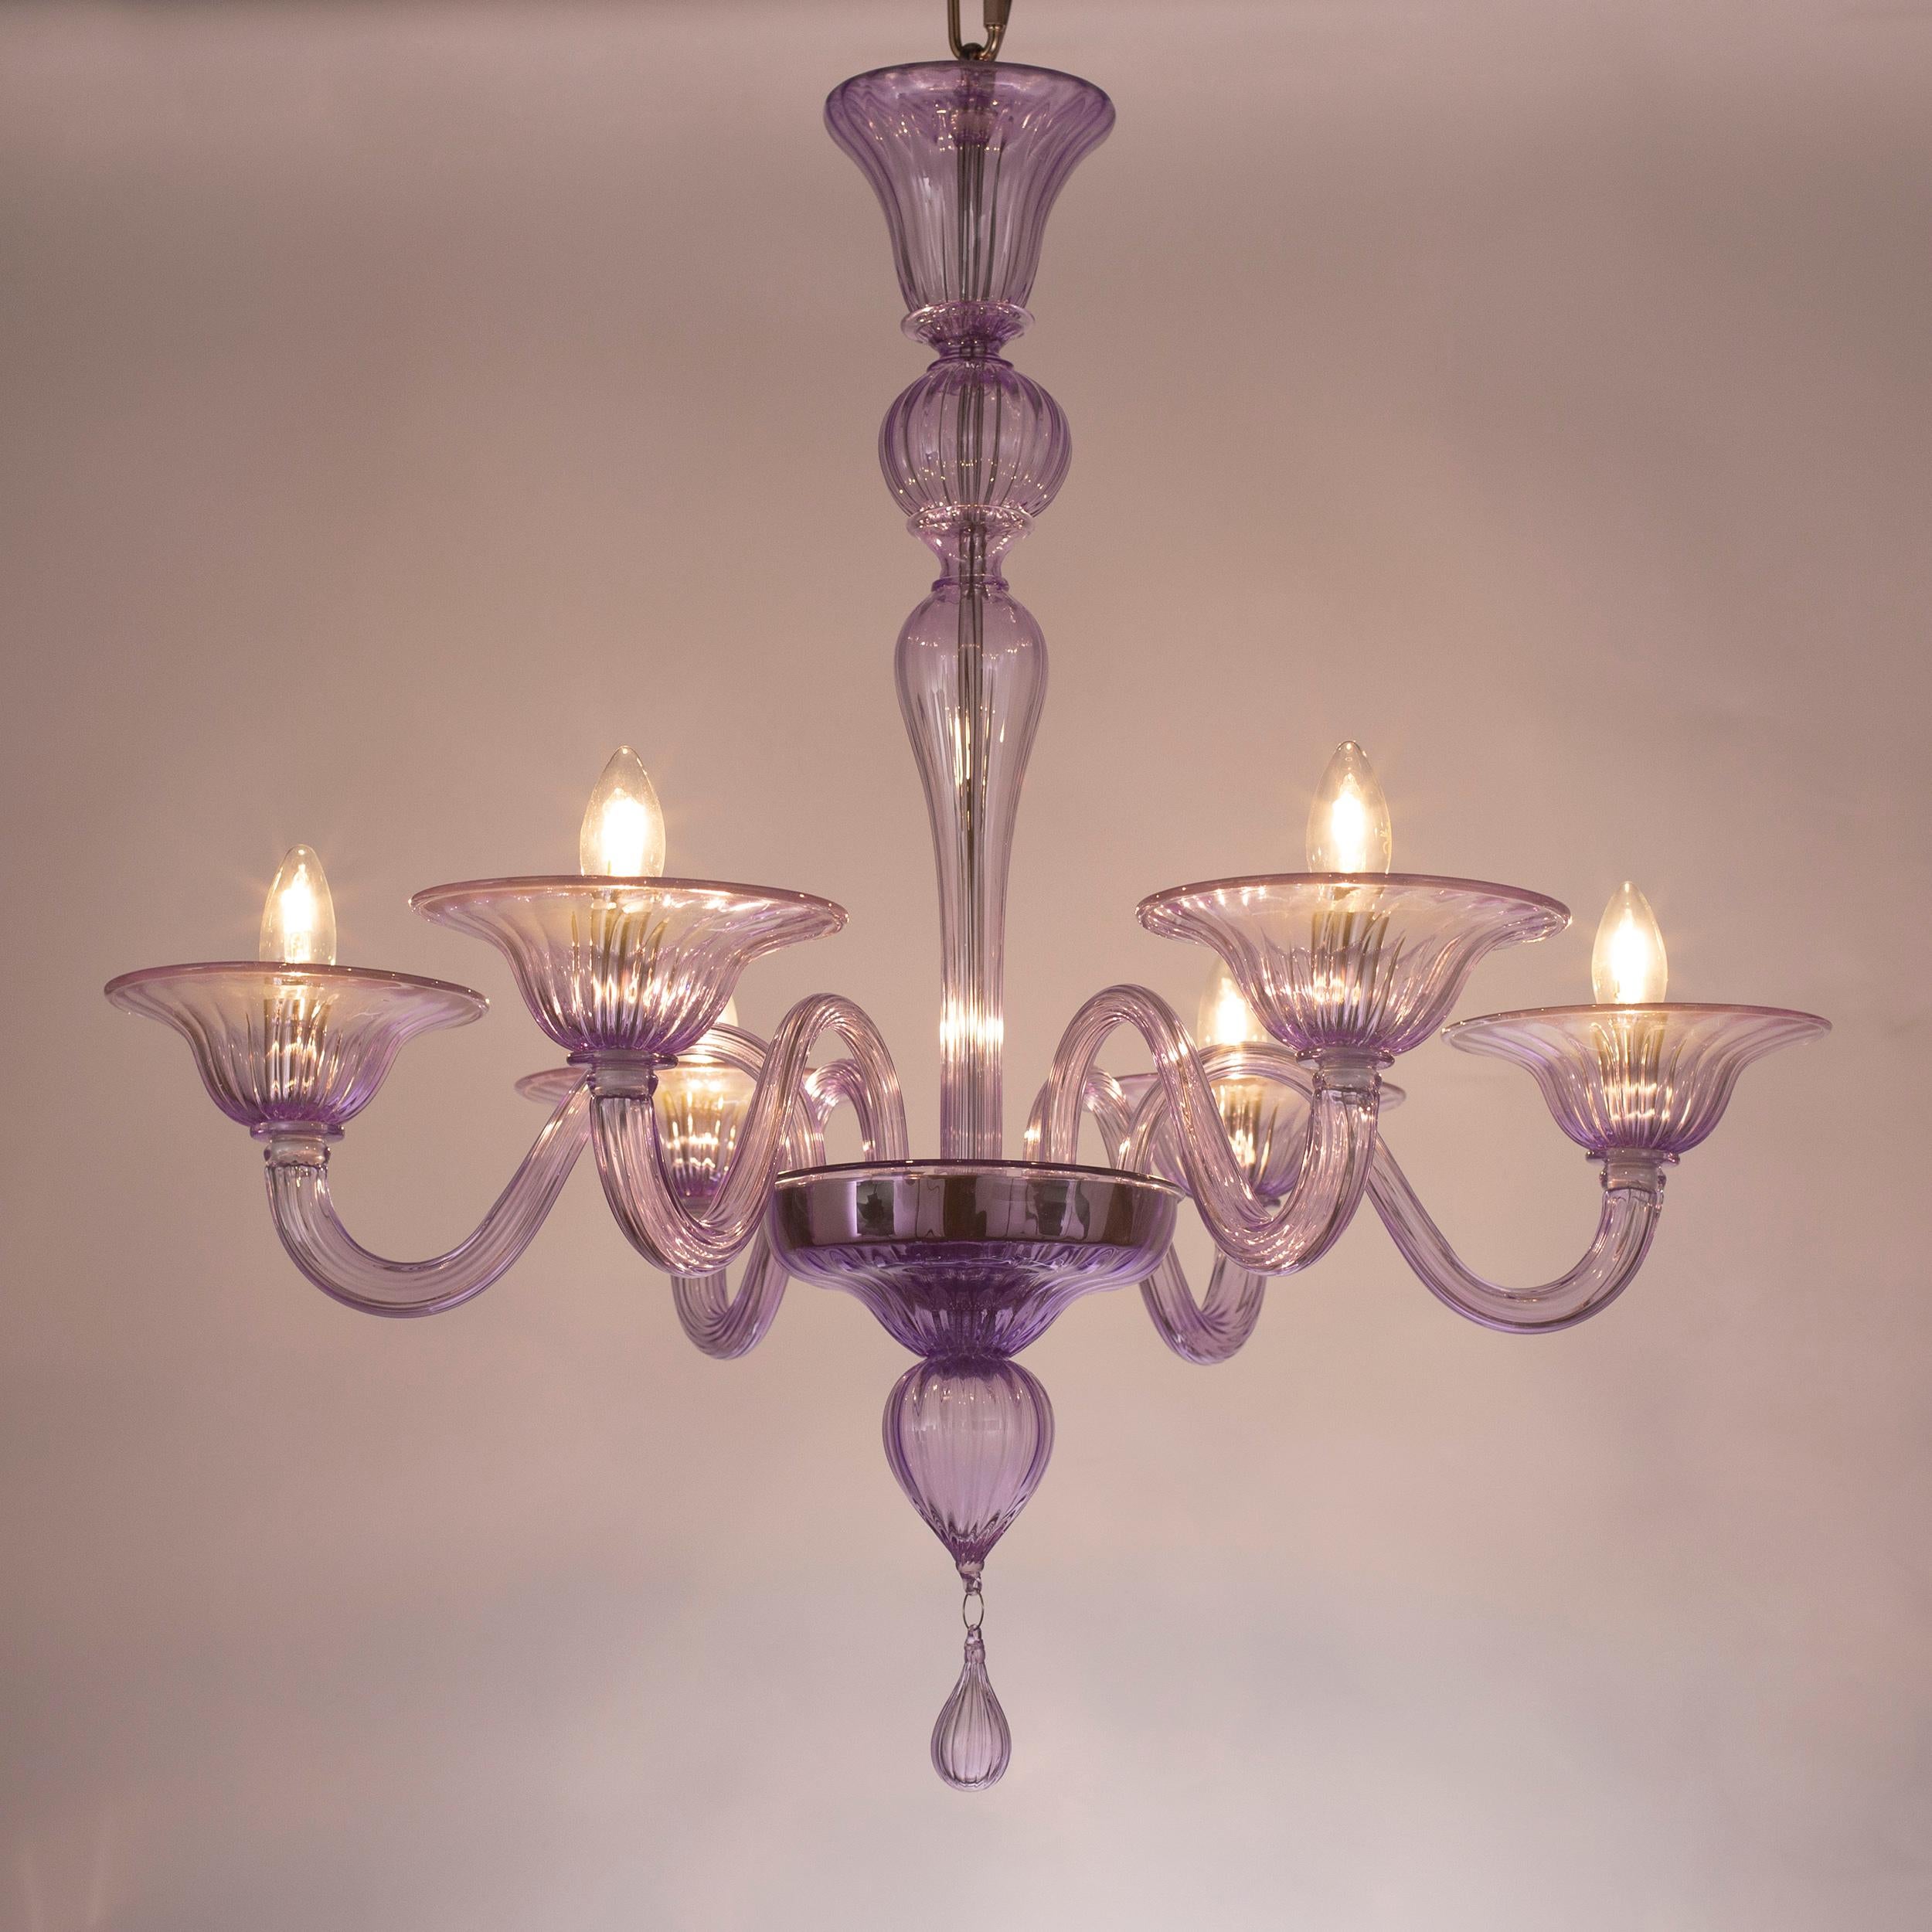 Simplicissimus 360 chandelier, 6 lights, lilac wisteria lavender artistic glass by Multiforme
This collection in Murano glass is characterized by superb simplicity. It is the result of a research which harks back to the Classic Murano chandeliers